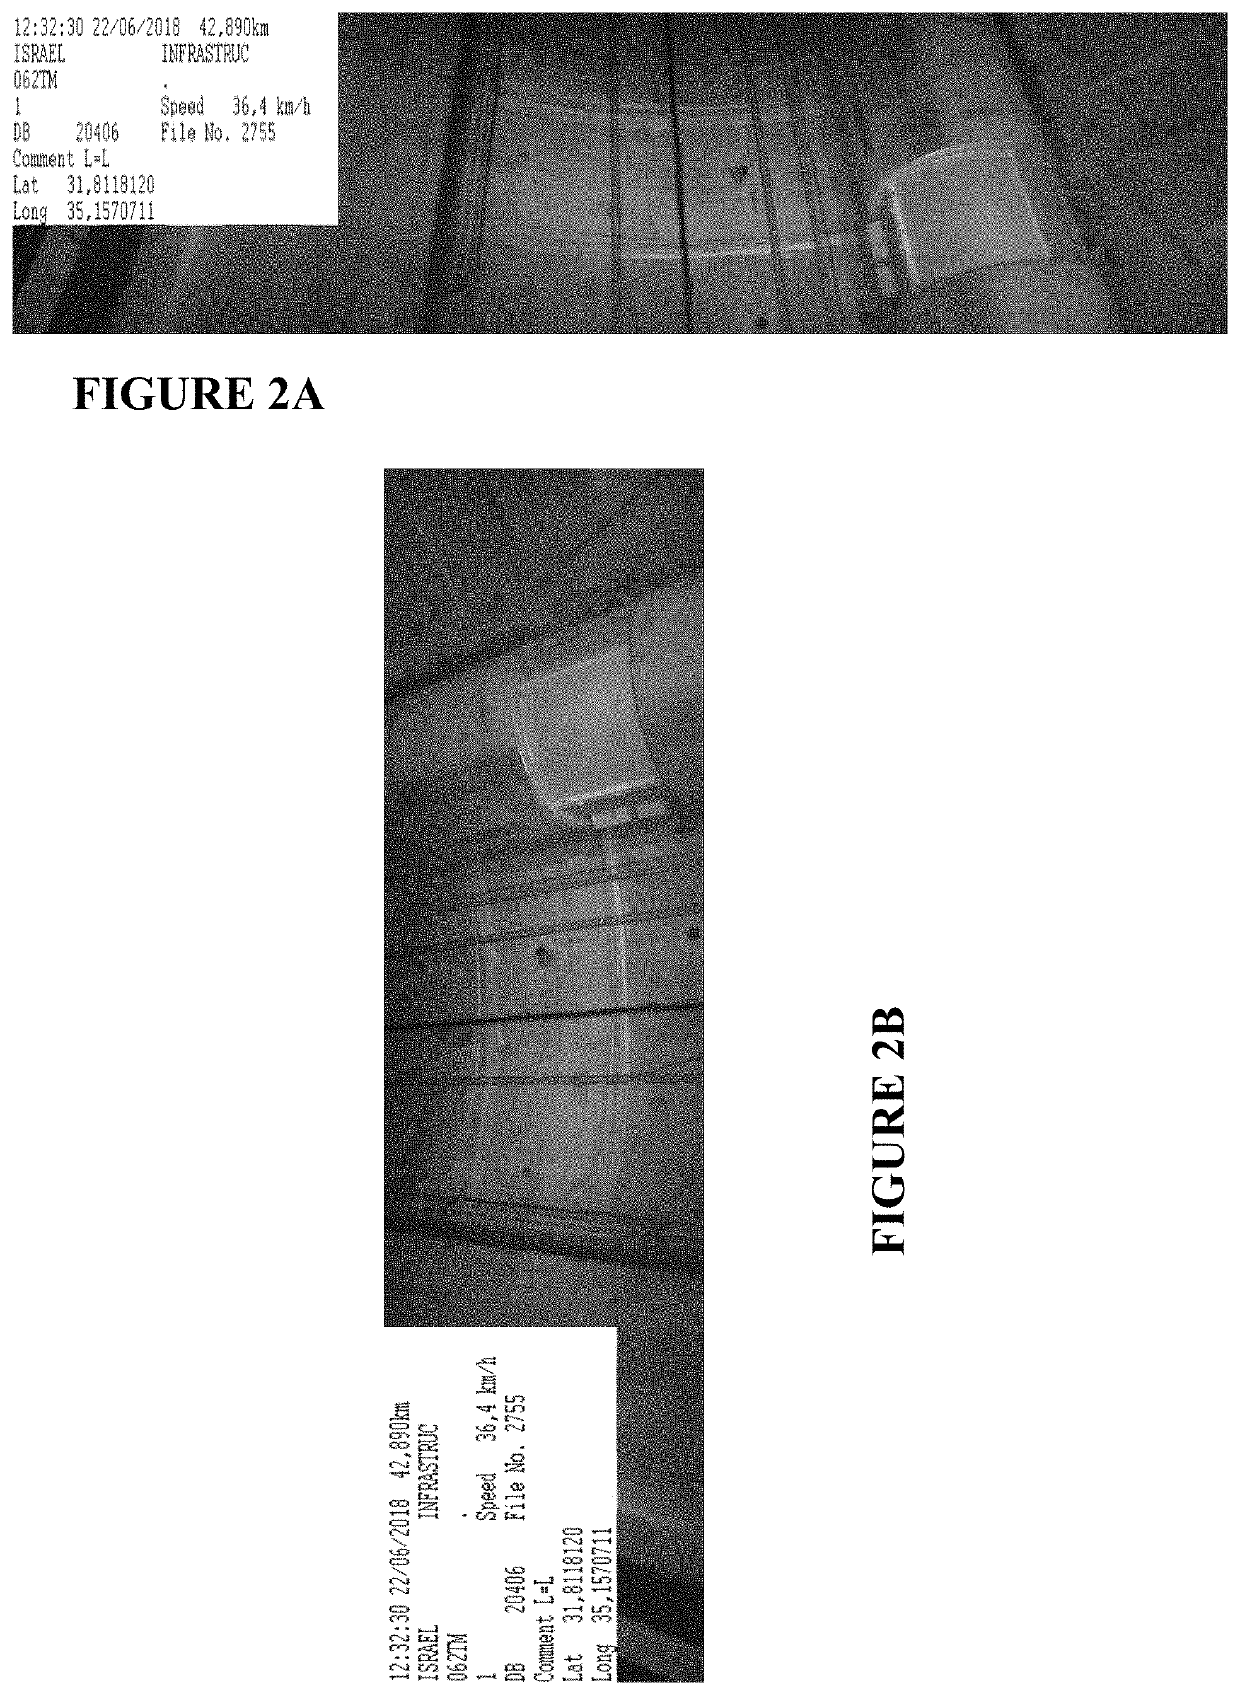 System and method for early identification and monitoring of defects in transportation infrastructure